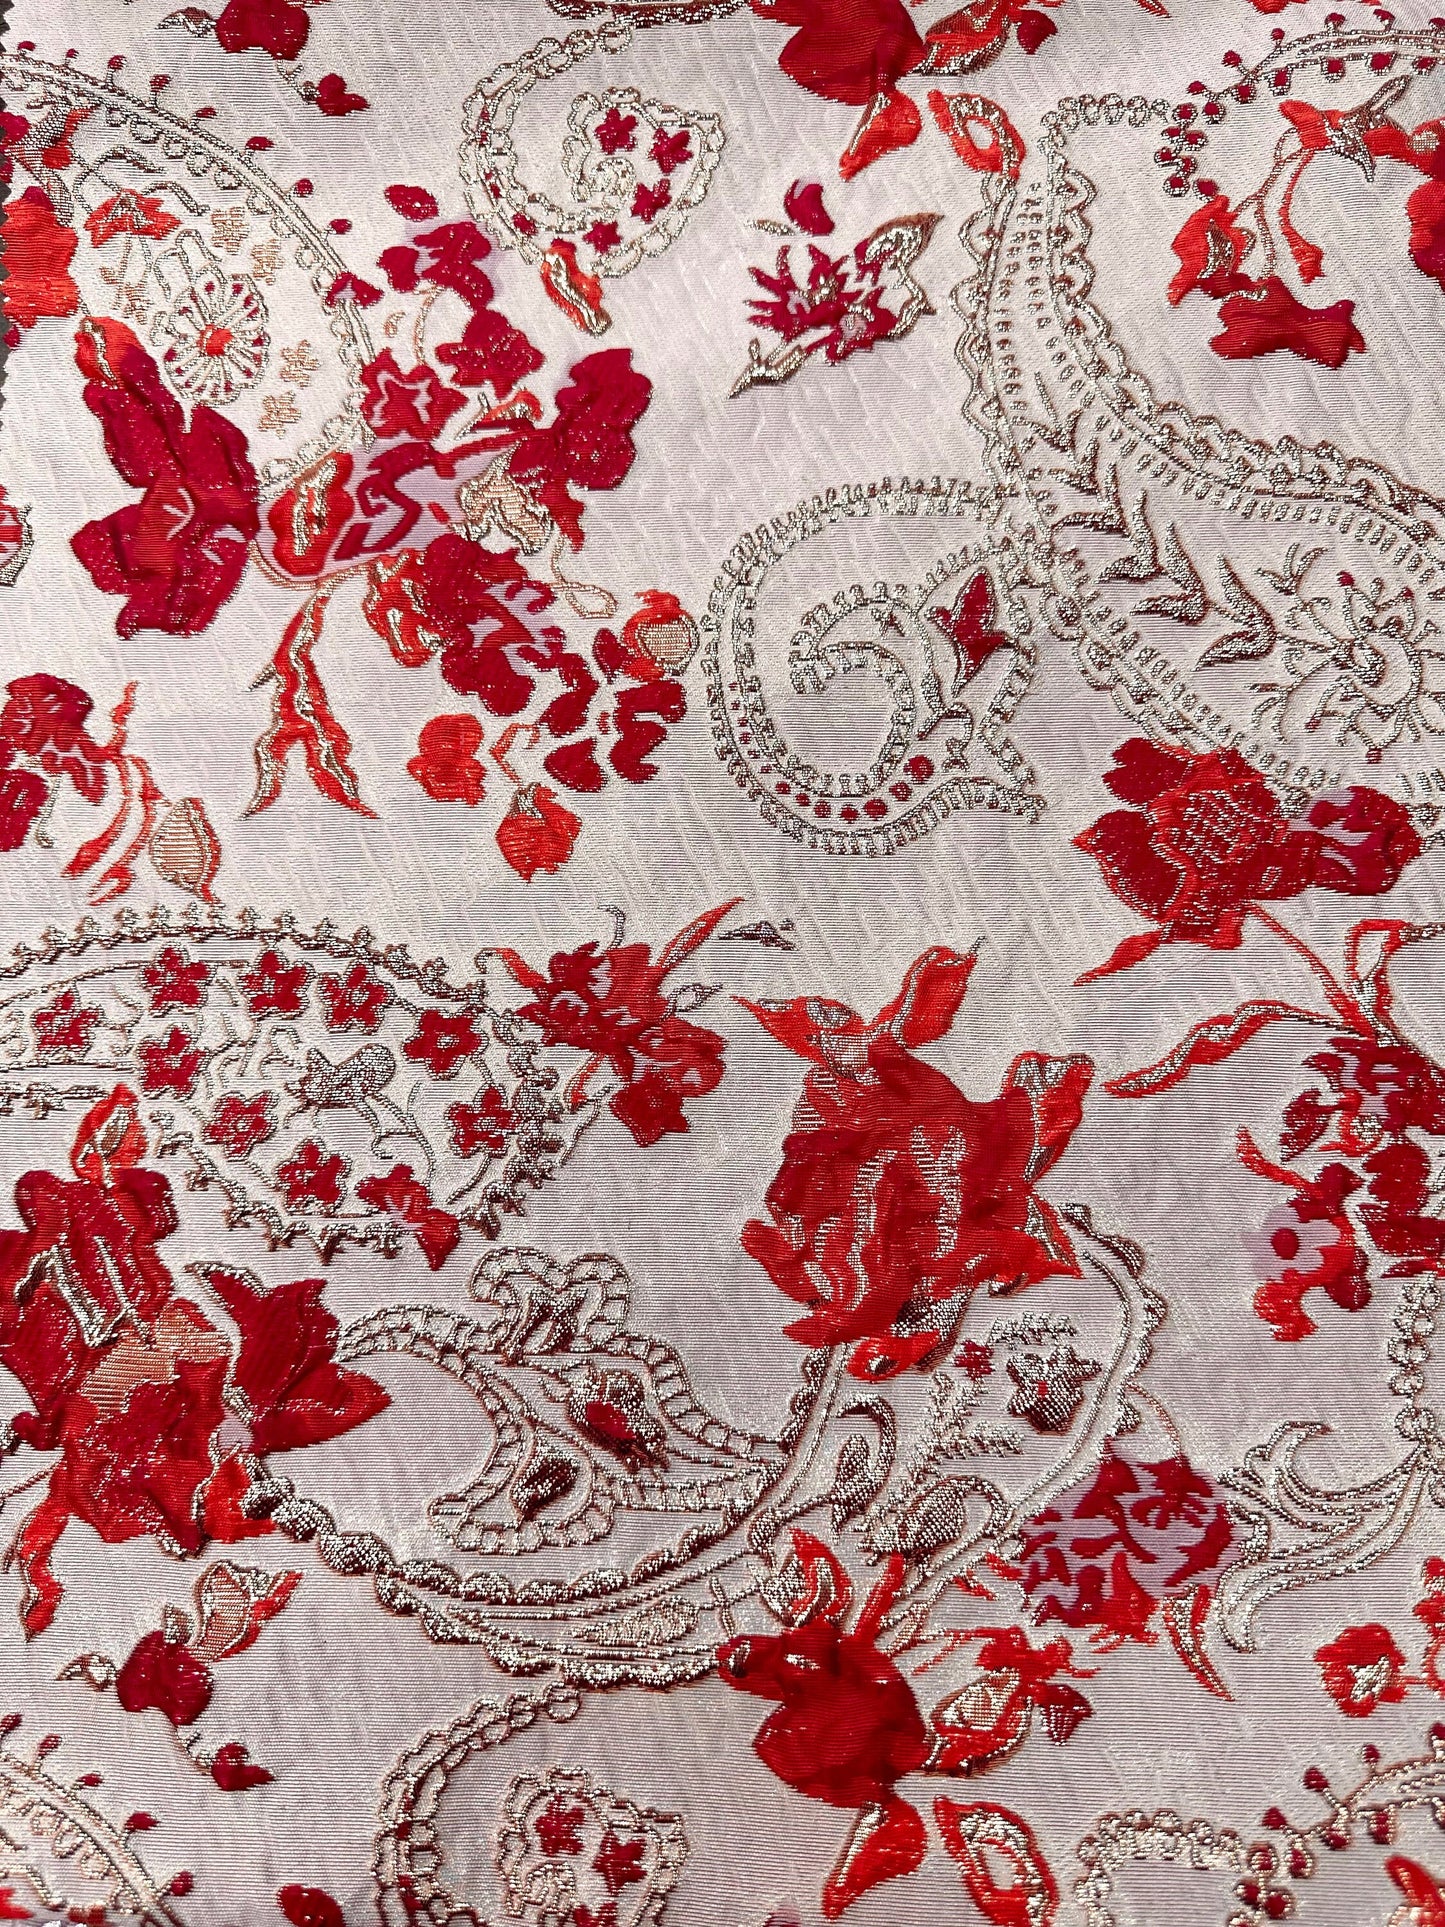 RED ORANGE GOLD Floral Paisley Brocade Fabric (60 in.) Sold By The Yard